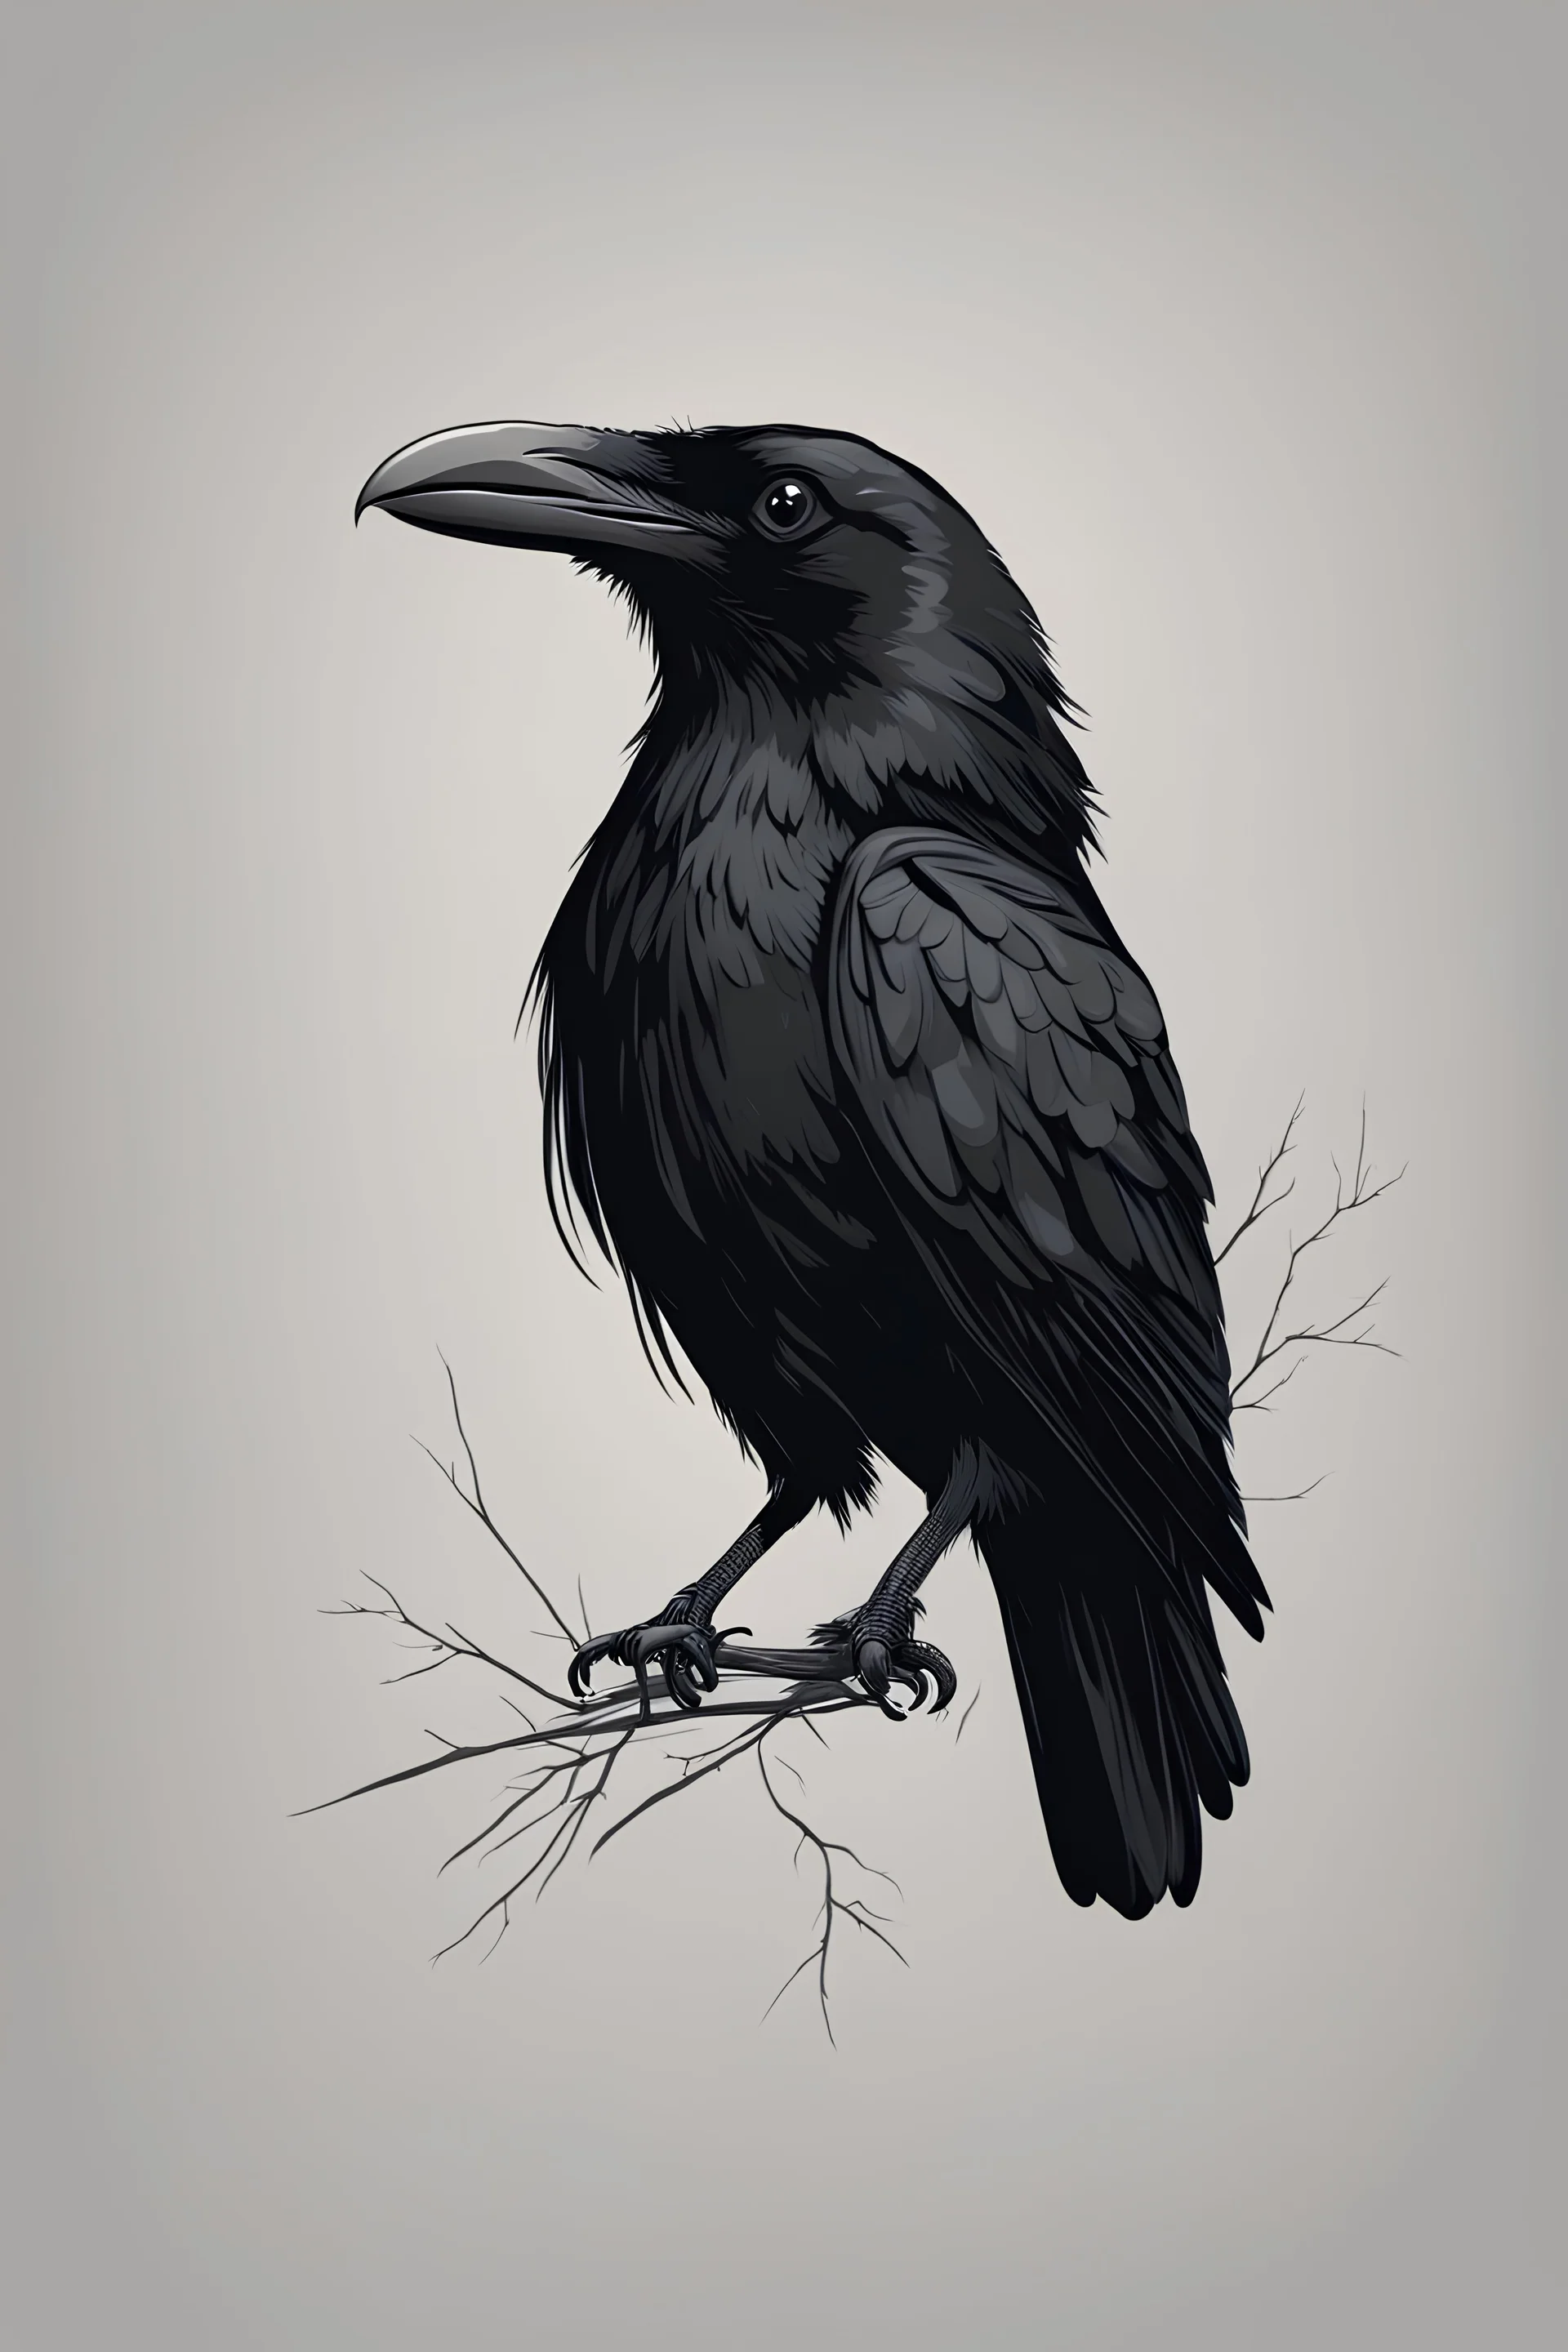 How To Draw A Crow For Beginners, Step by Step, Drawing Guide, by Dawn -  DragoArt